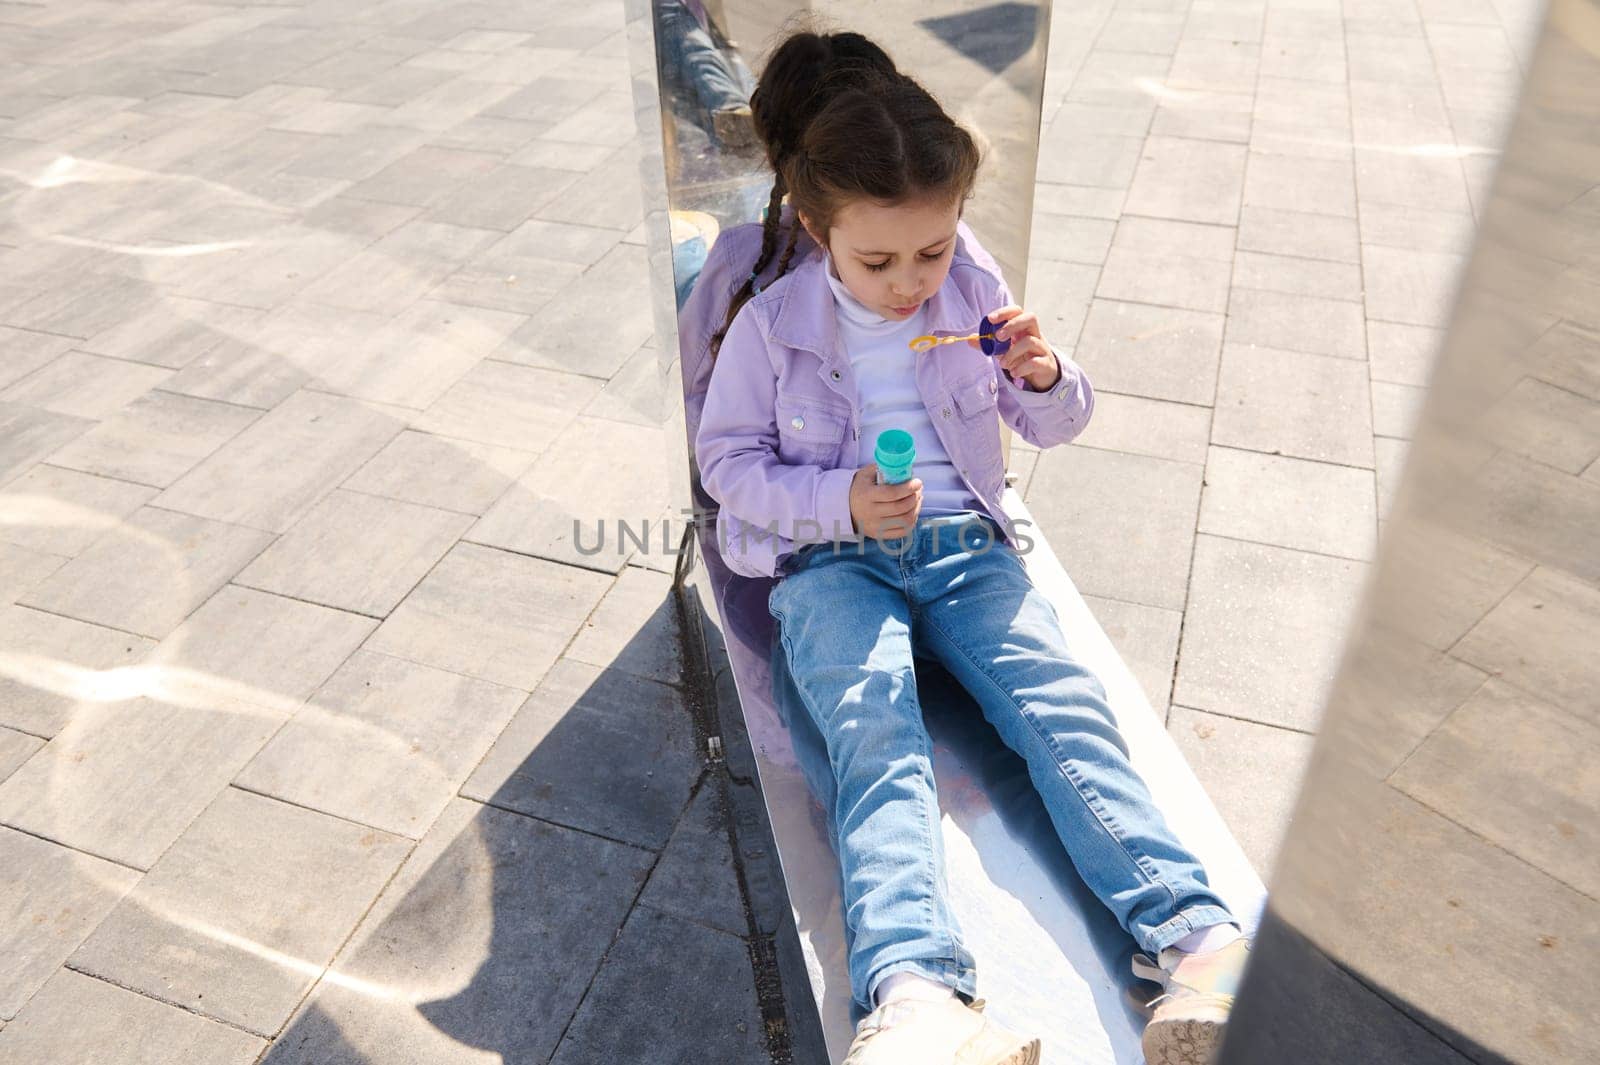 View from above of Caucasian adorable little child girl sitting on metal mirror bench, blowing soap bubbles while resting in urban park on a sunny day. Leisure activity. Happy carefree childhood